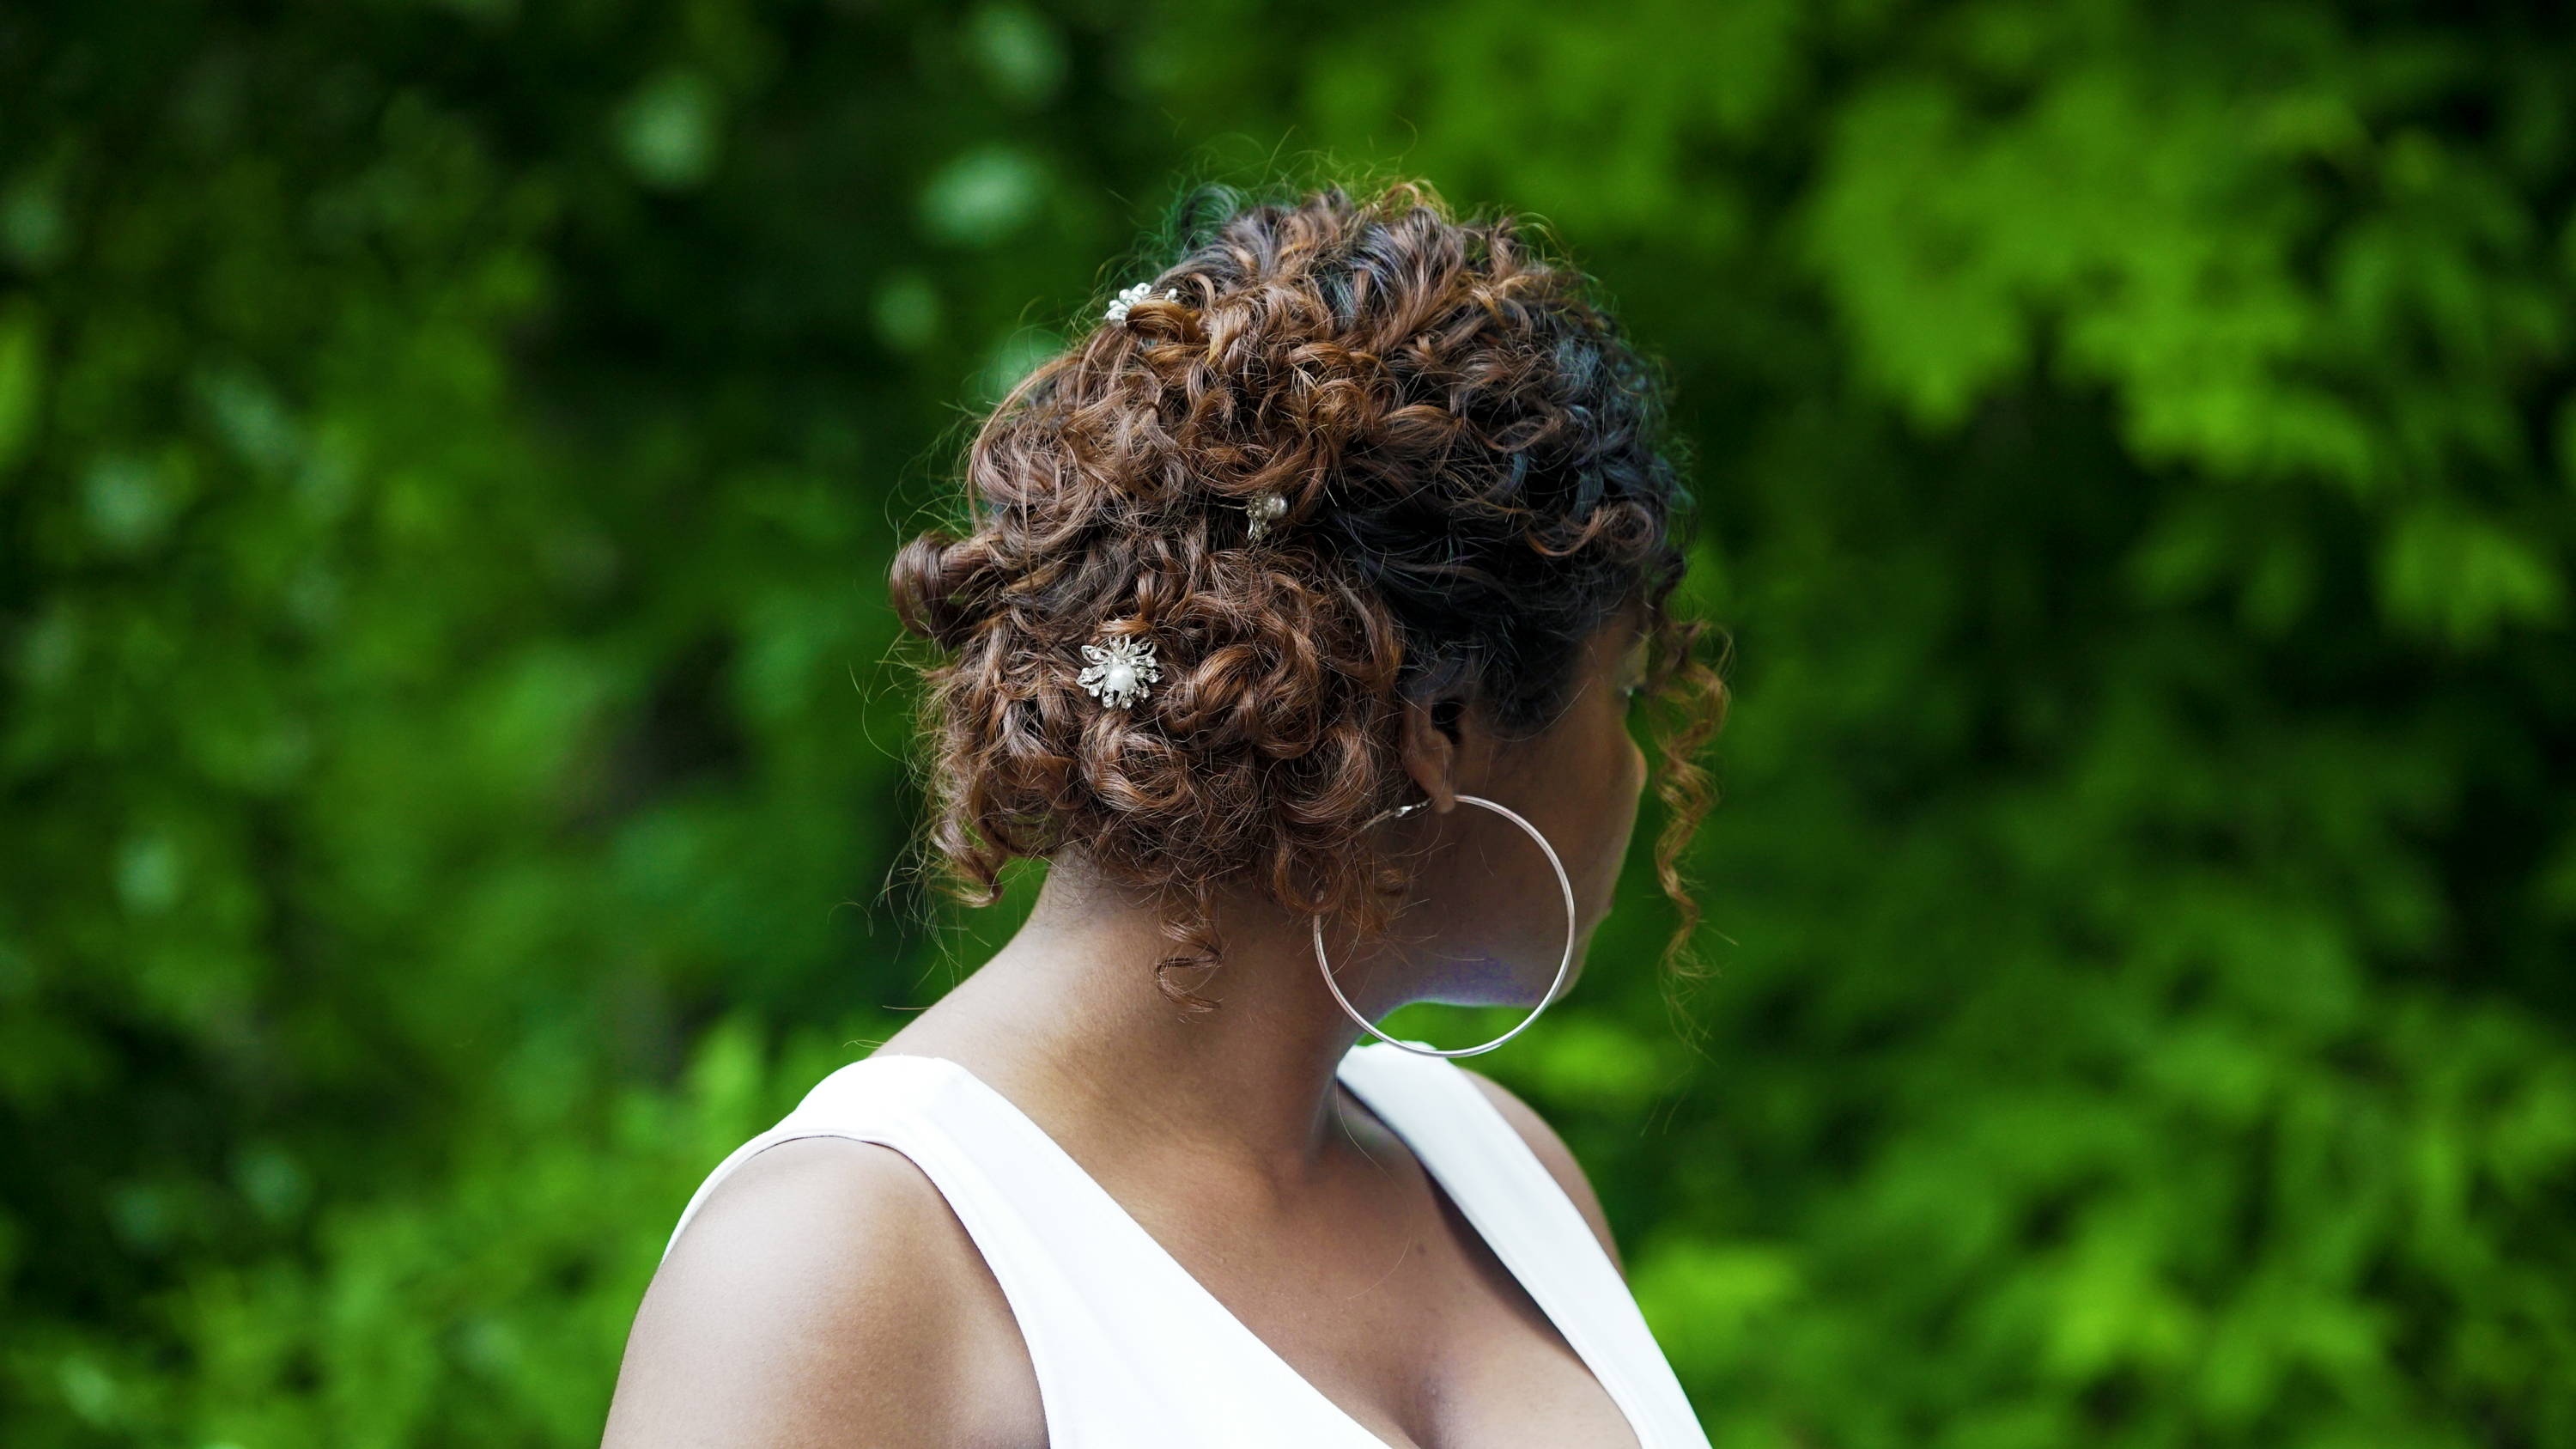 How-To Rock Ur Curls for Special Occasions